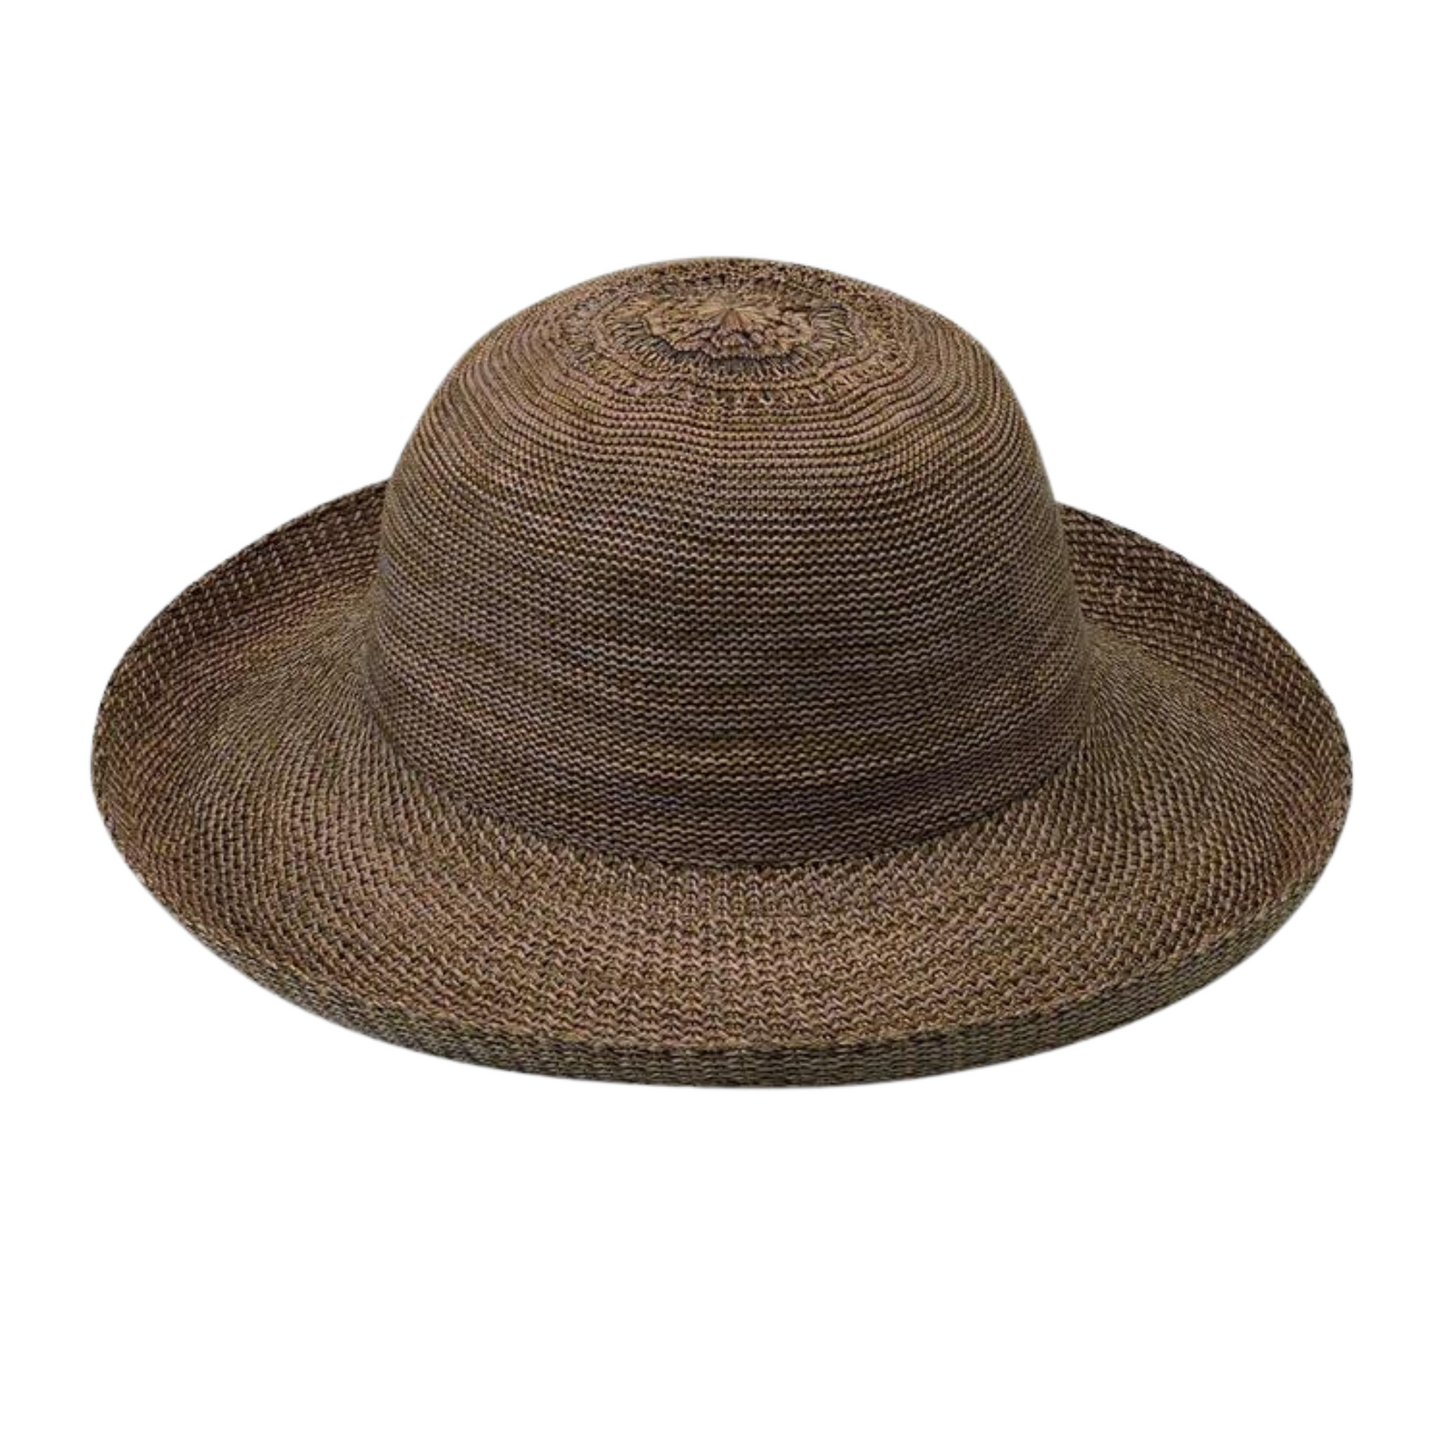 Neutral brown weaved hat with soft curvature and rolled in brim.